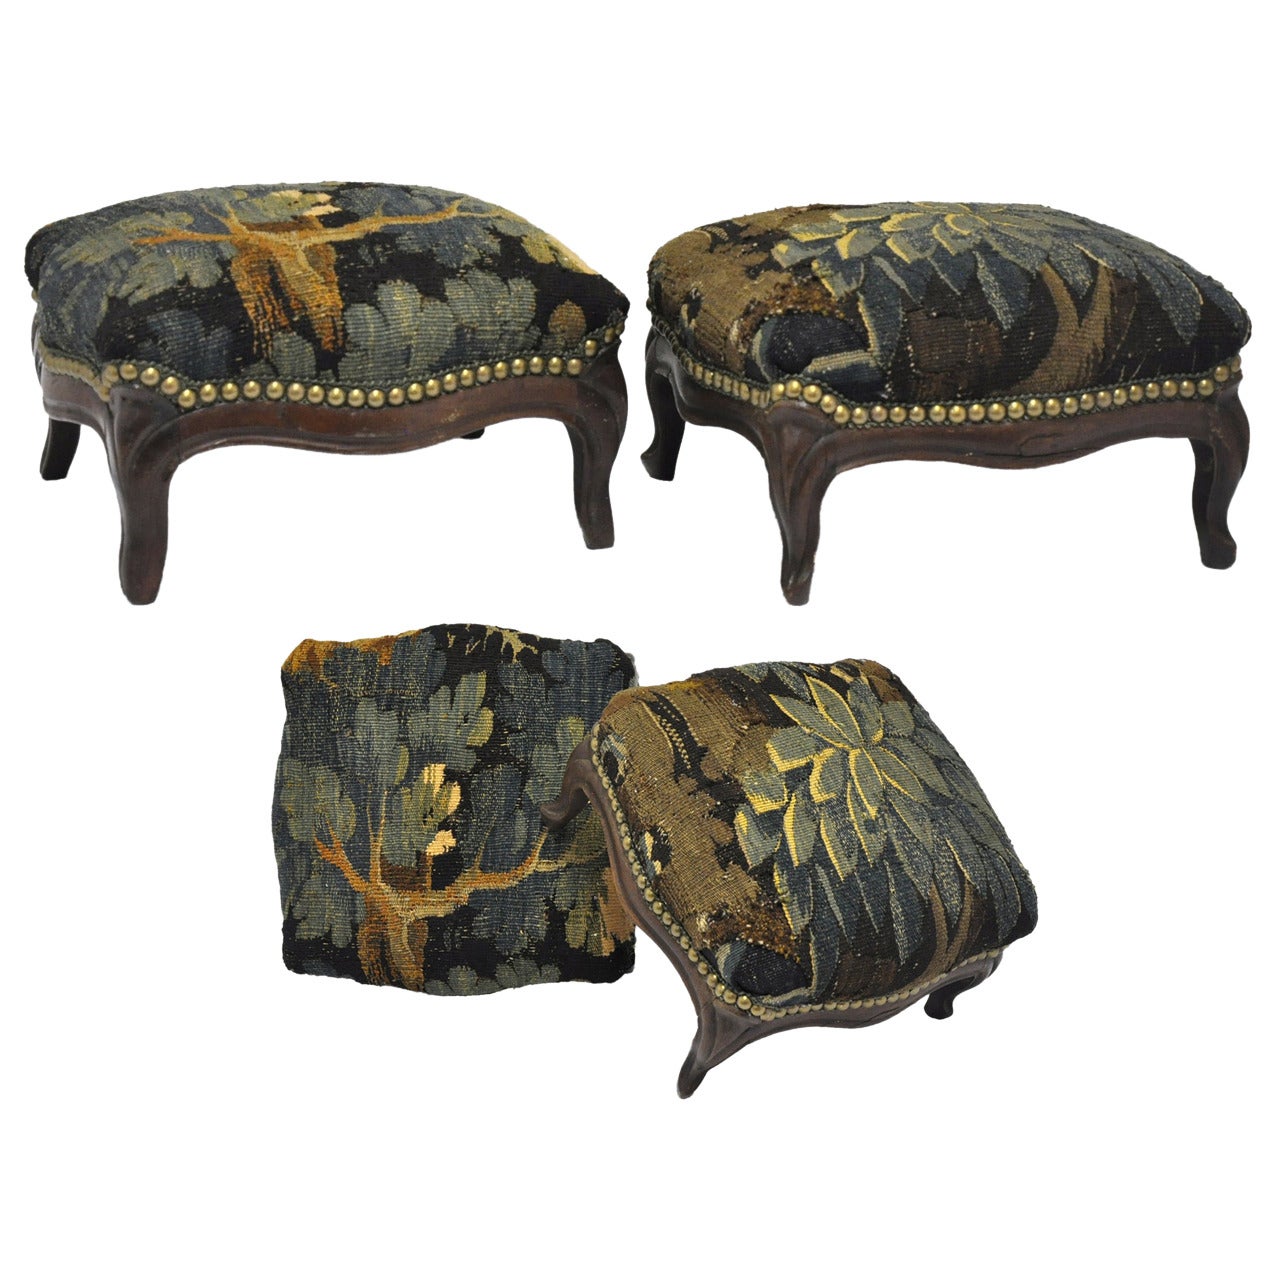 Pair of 18th Century Foot Stools with Aubusson